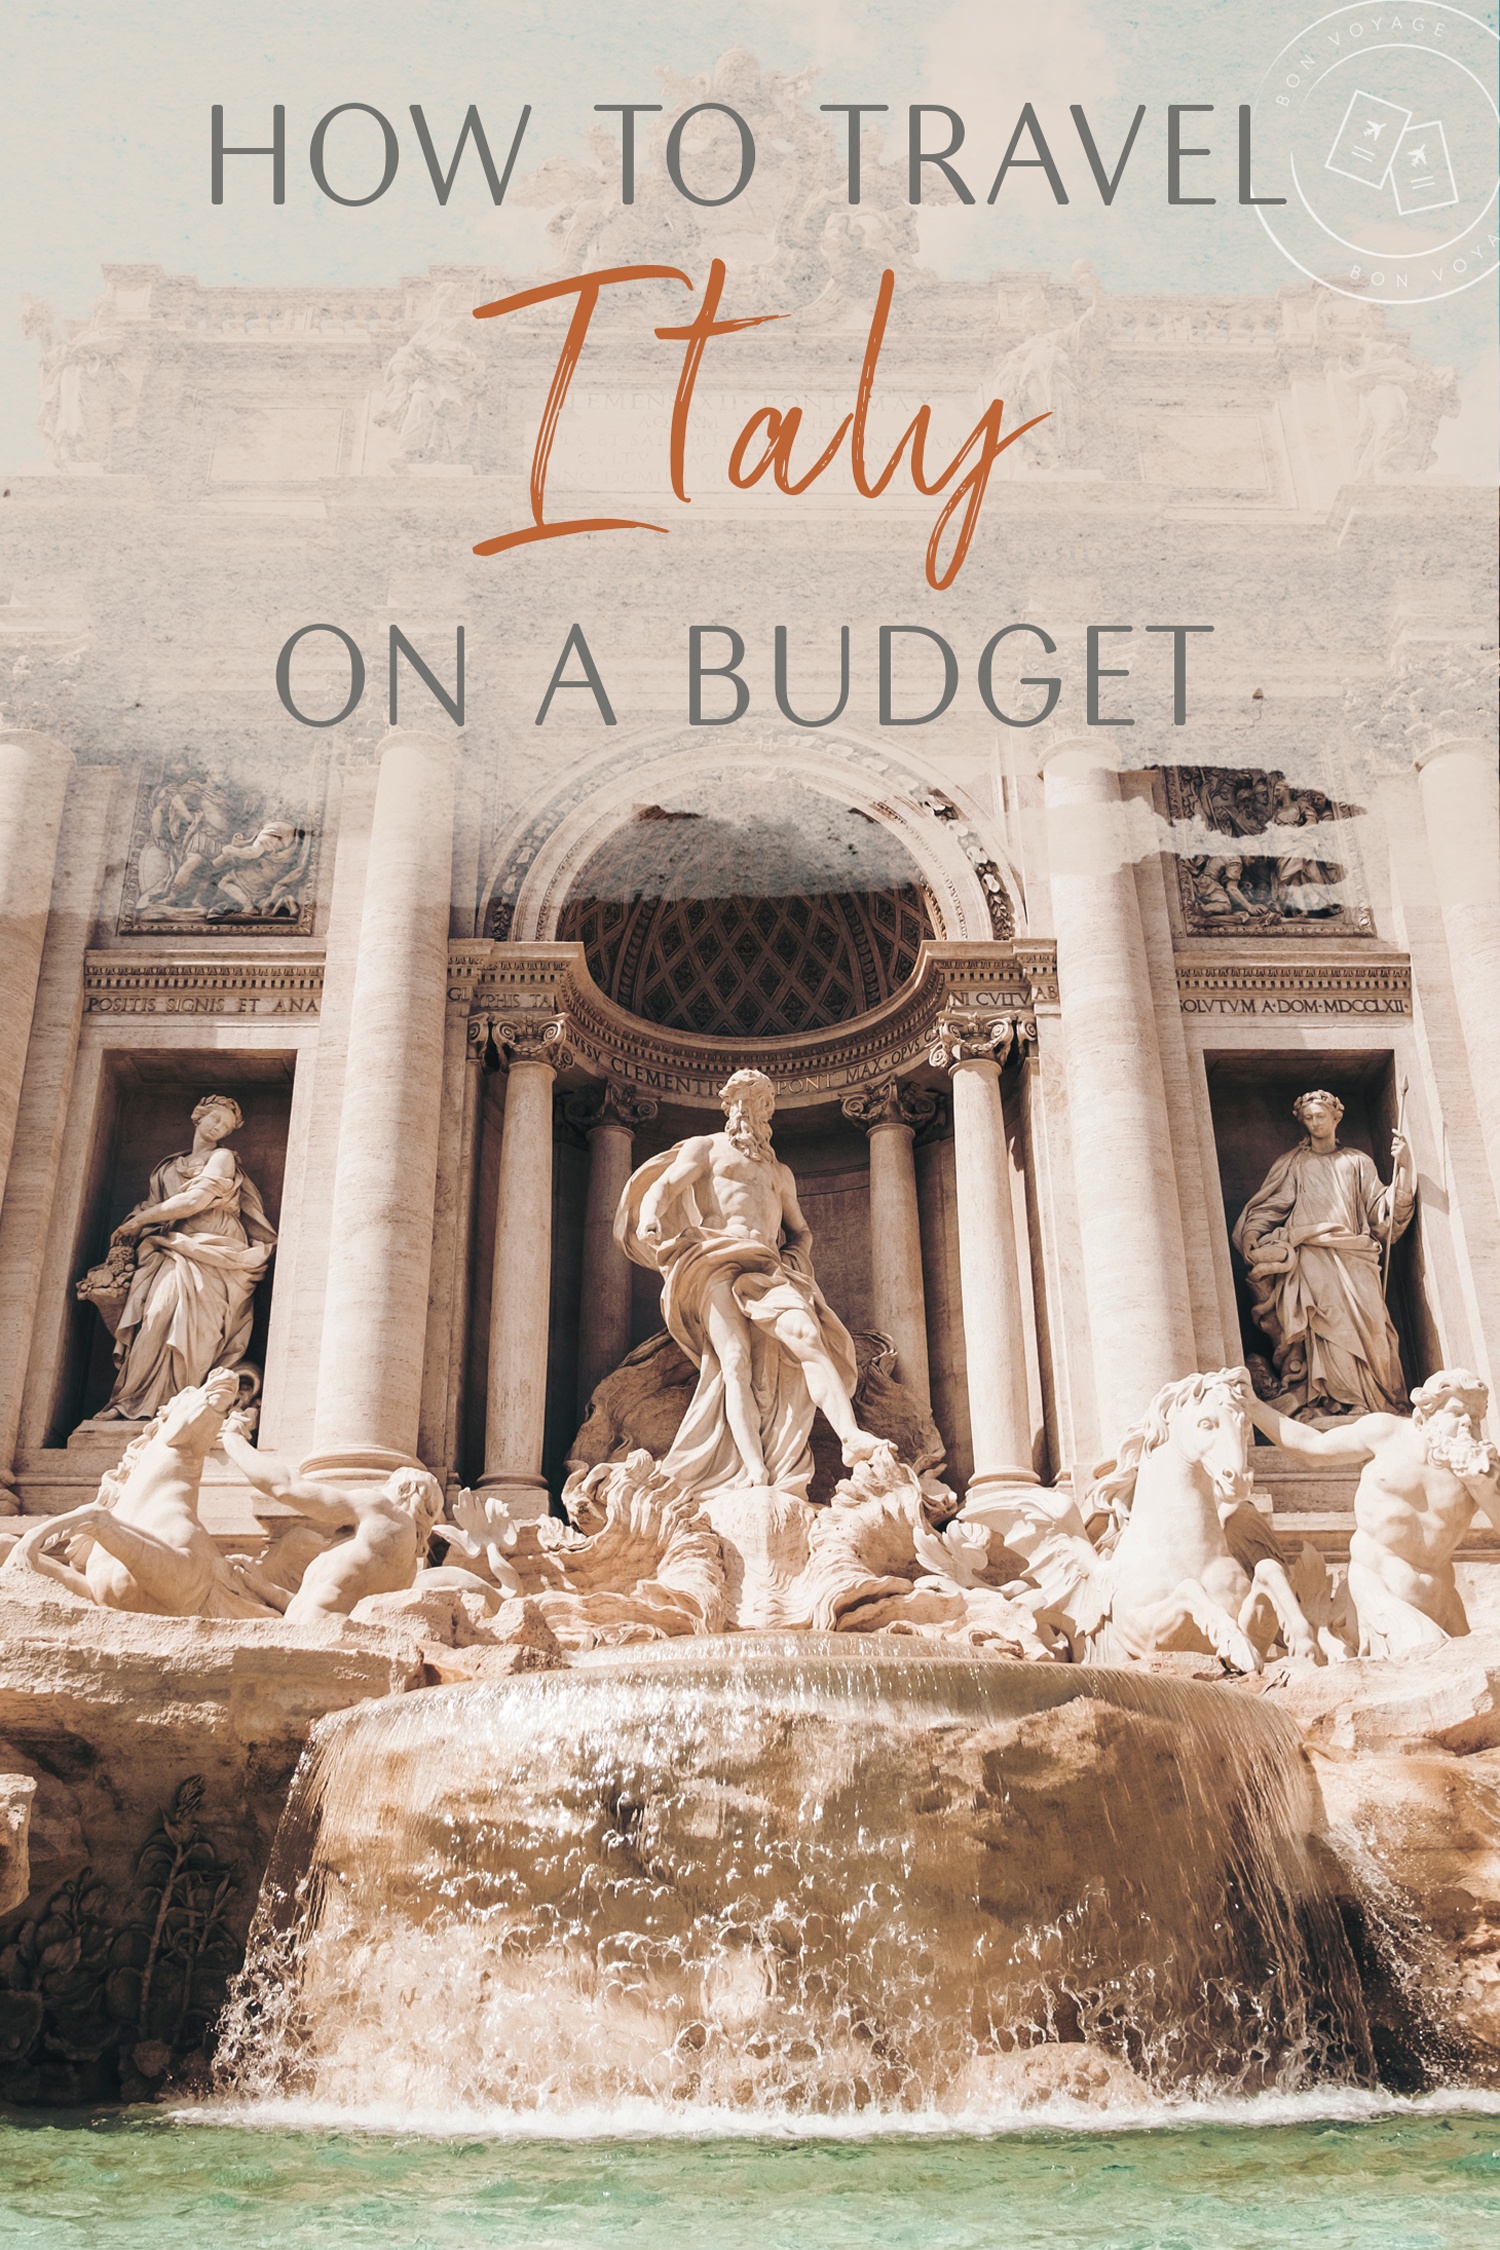 how to travel italy on a budget